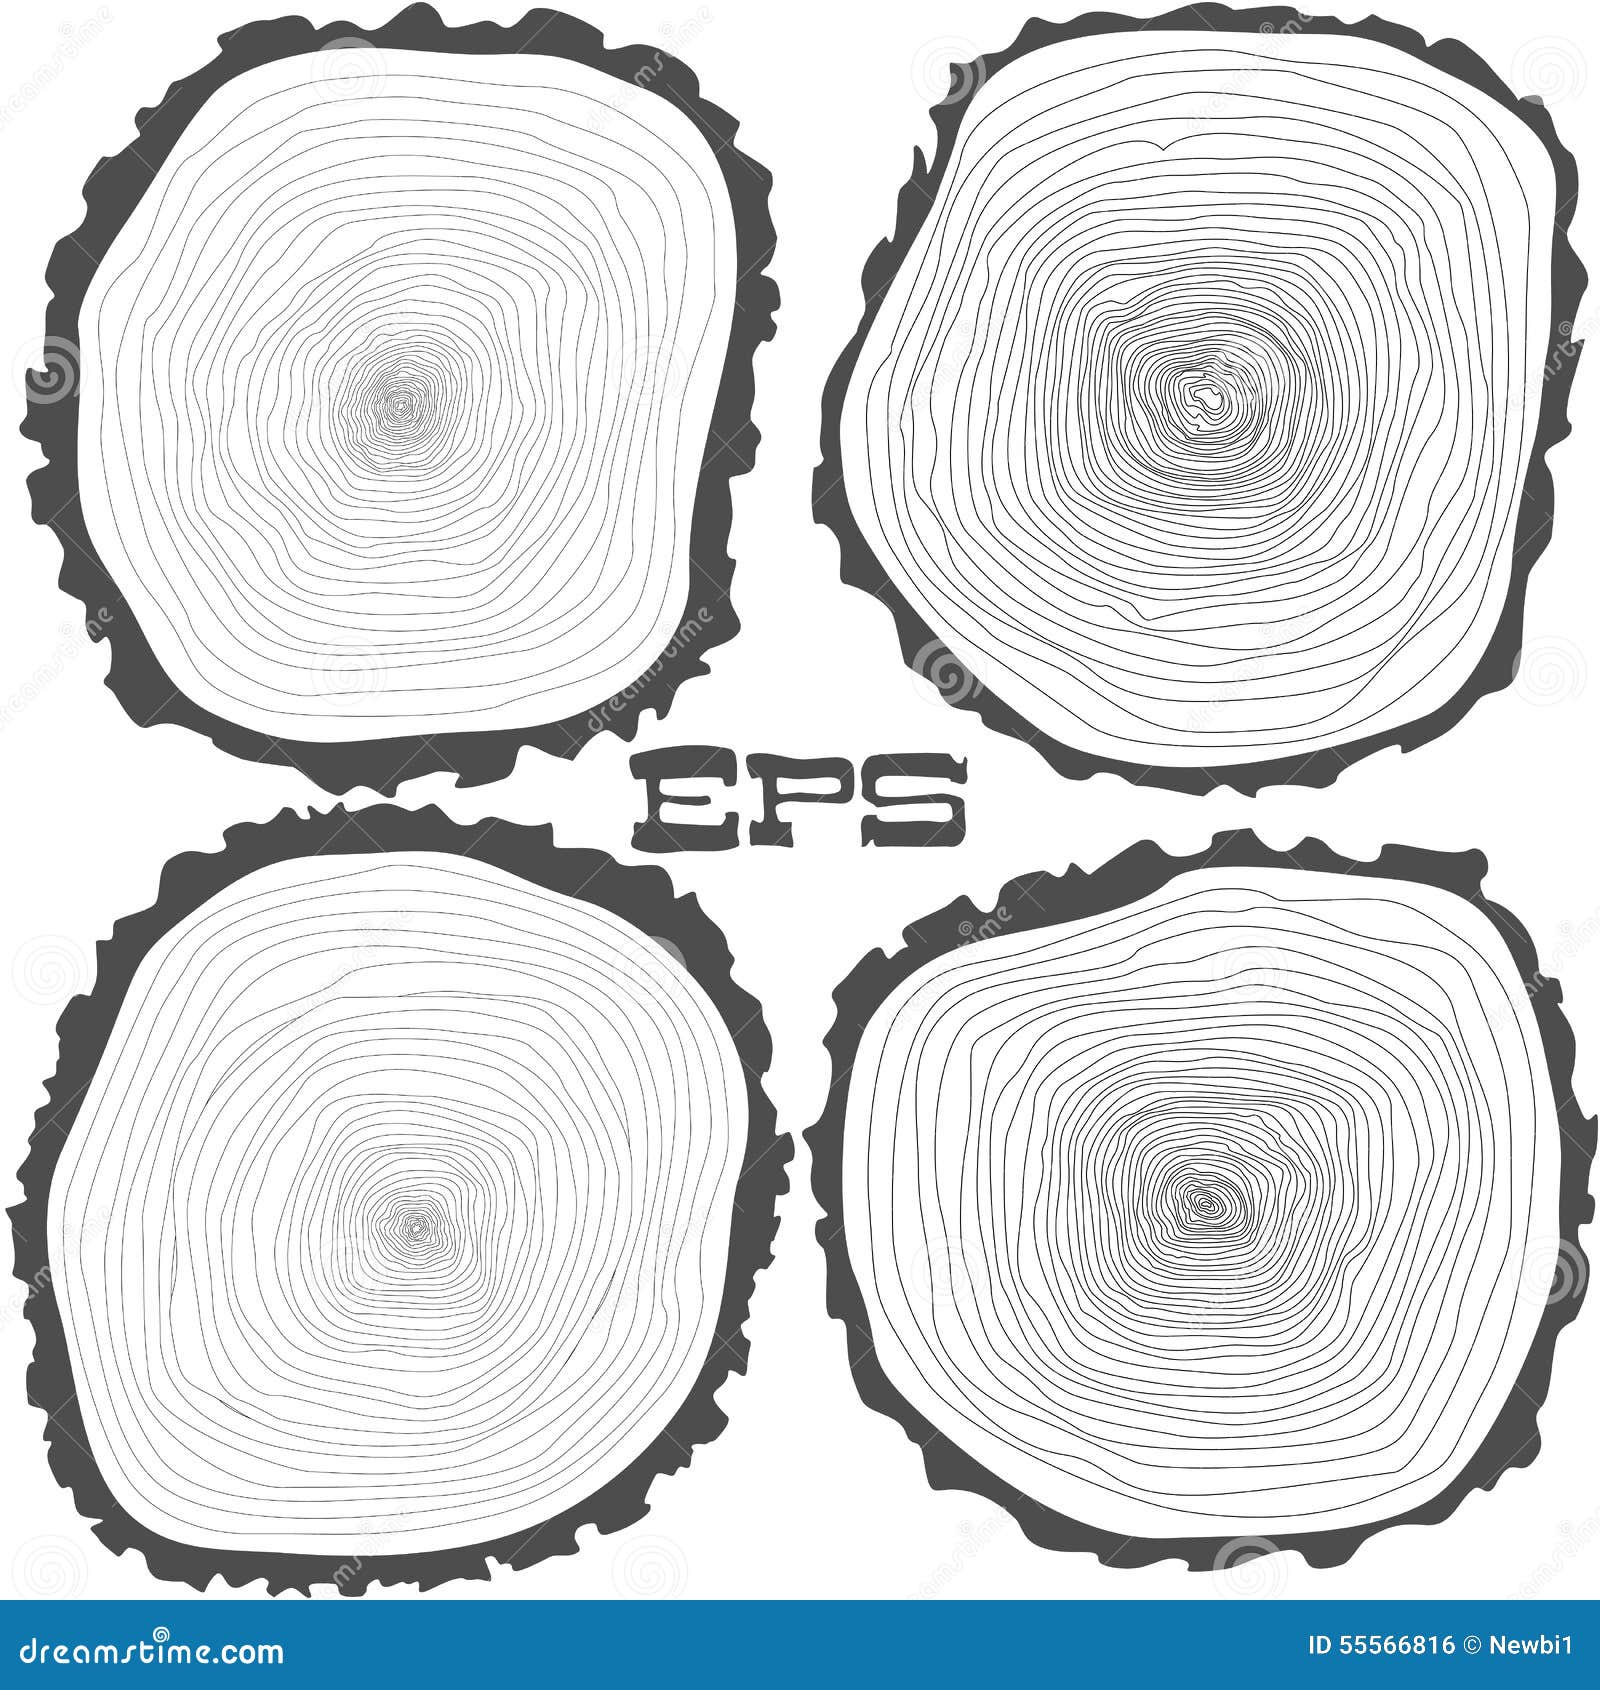 Tree Rings in Recently Cut Eucalyptus Tree Trunk Stock Photo - Image of  crosssection, rings: 211650874